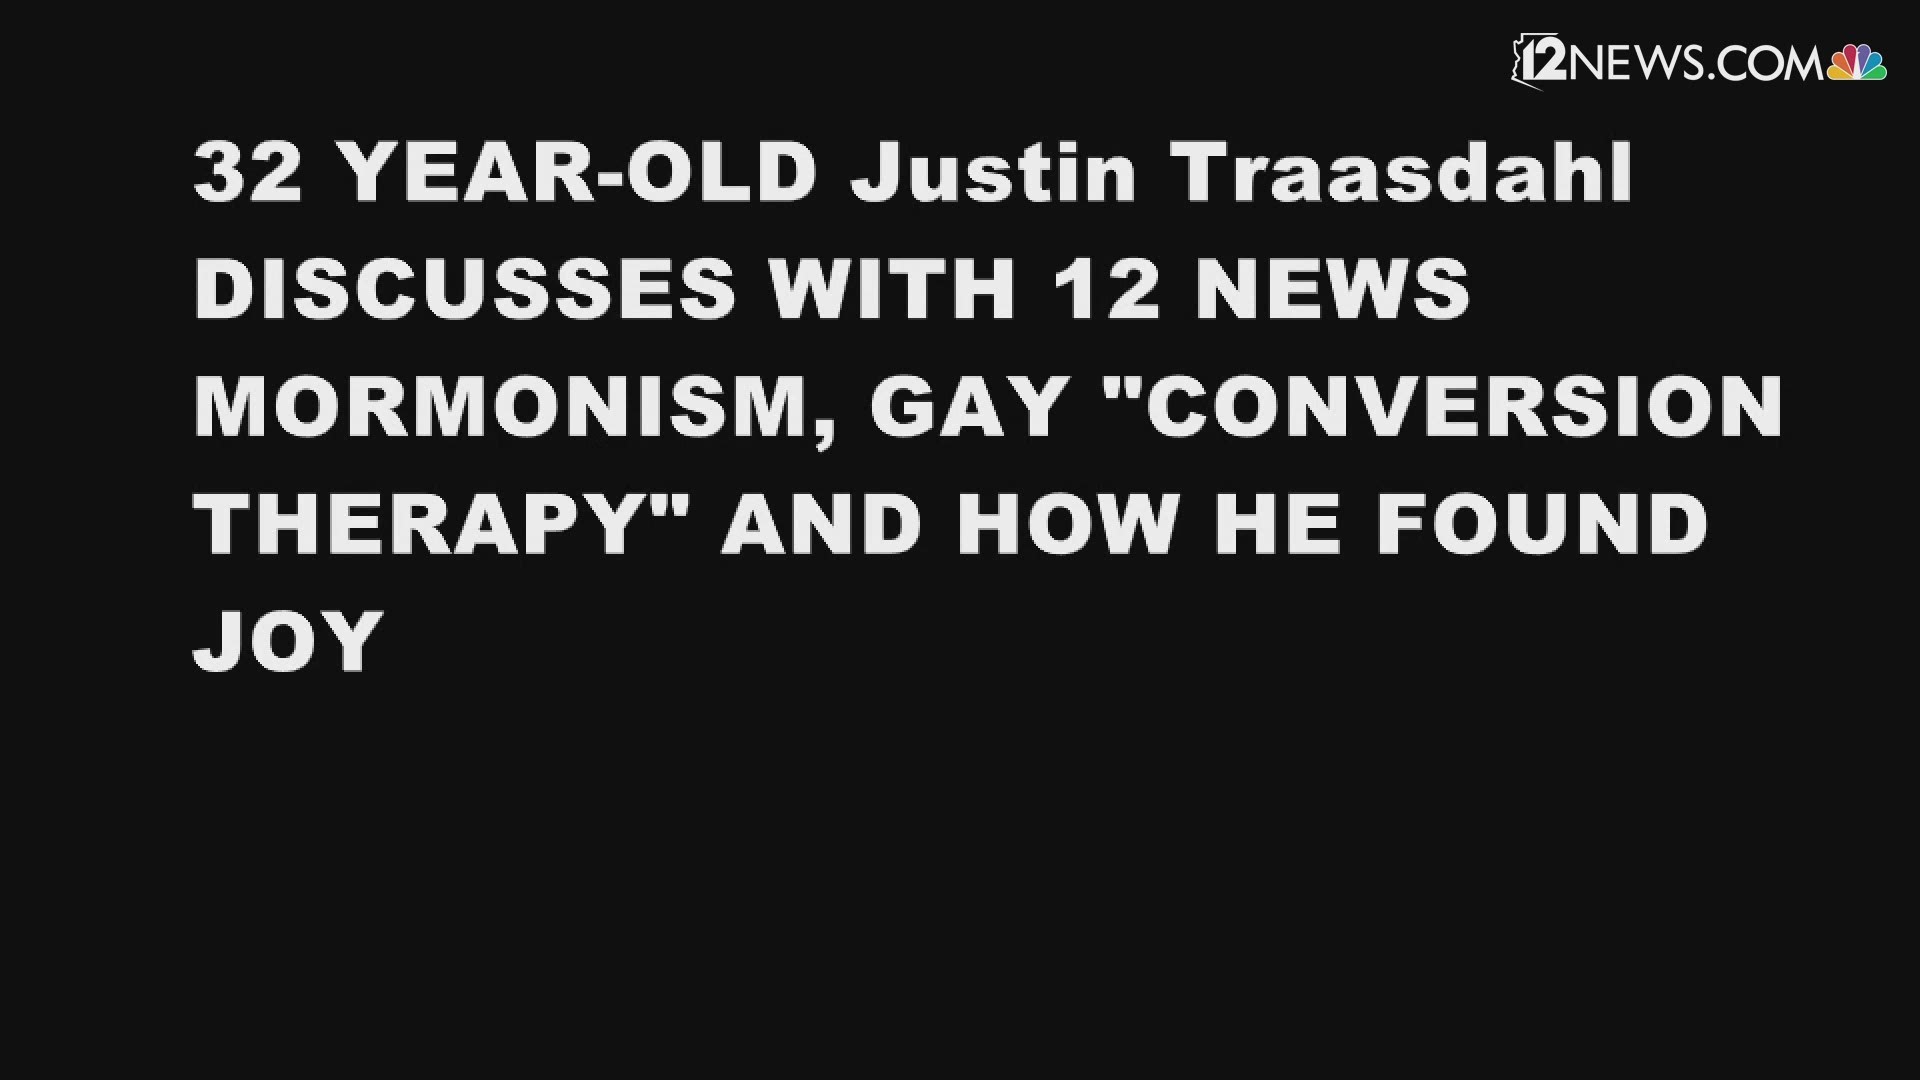 Gay conversion therapy, or reparative therapy, is discredited by major mental health organizations.